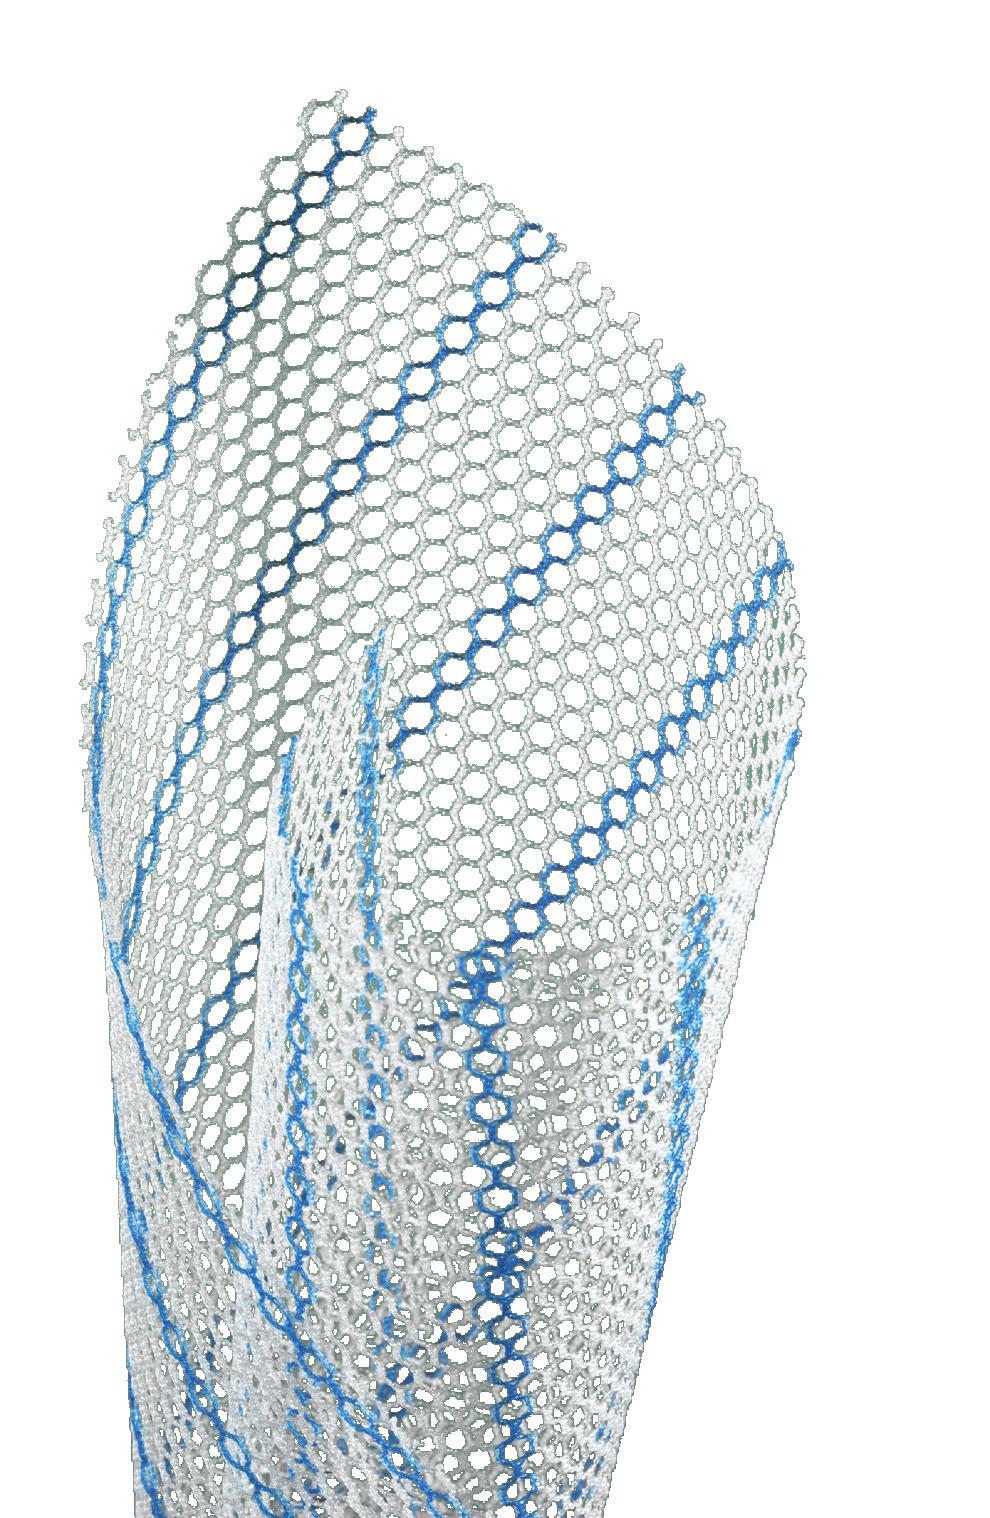 ULTRAPRO ADVANCED Macroporous Partially Absorbable Mesh Designed for exceptional intraoperative handling